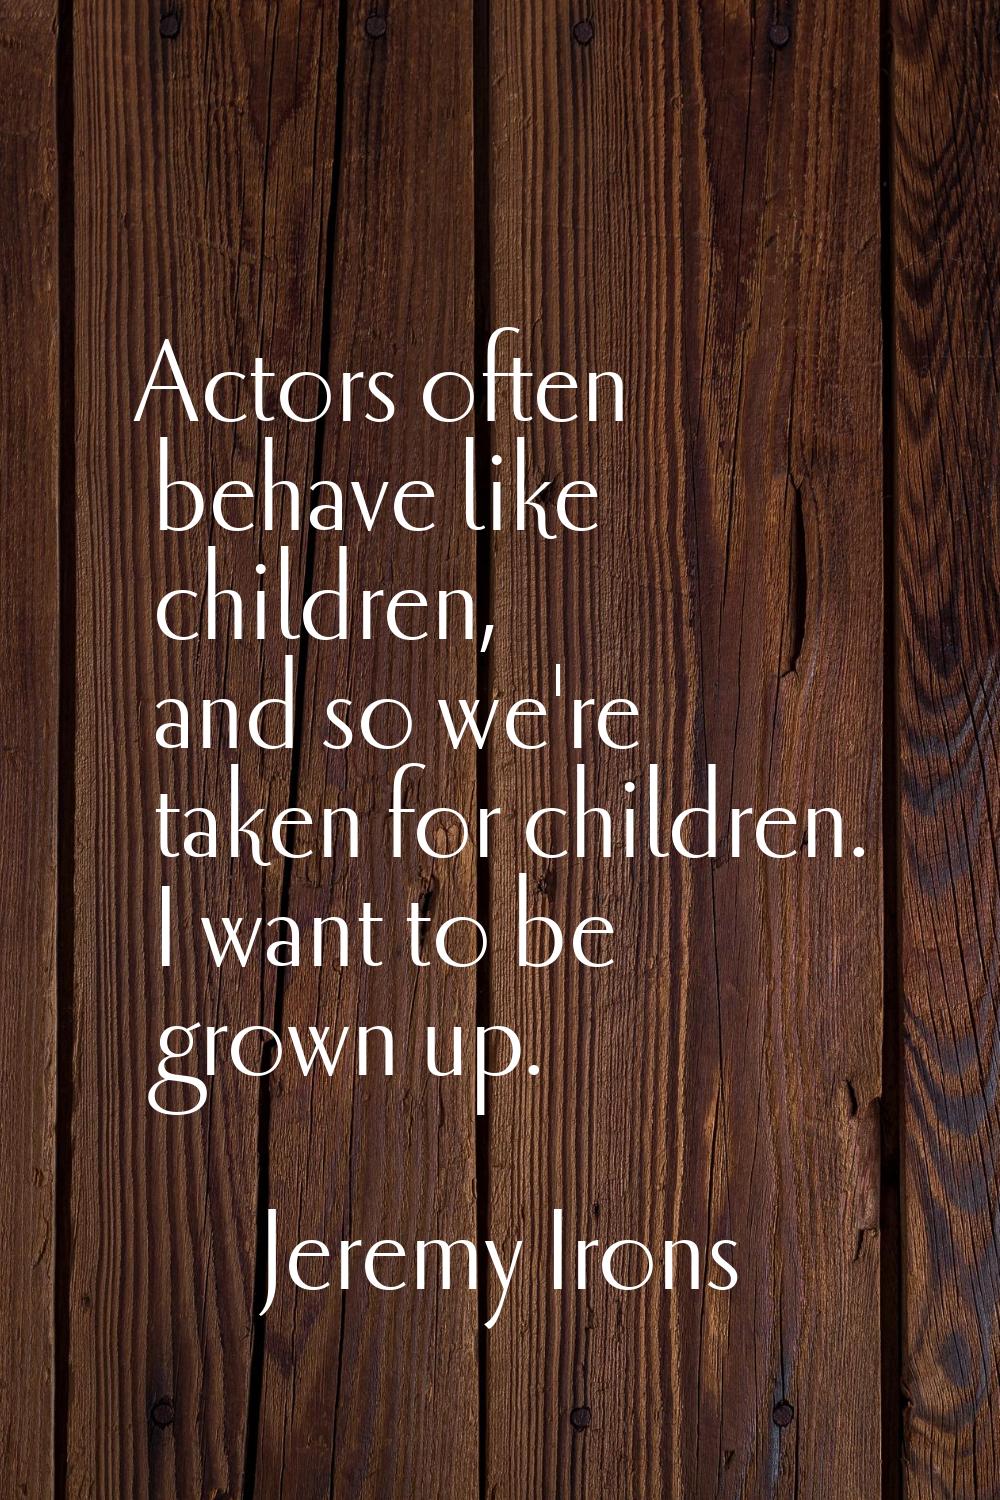 Actors often behave like children, and so we're taken for children. I want to be grown up.